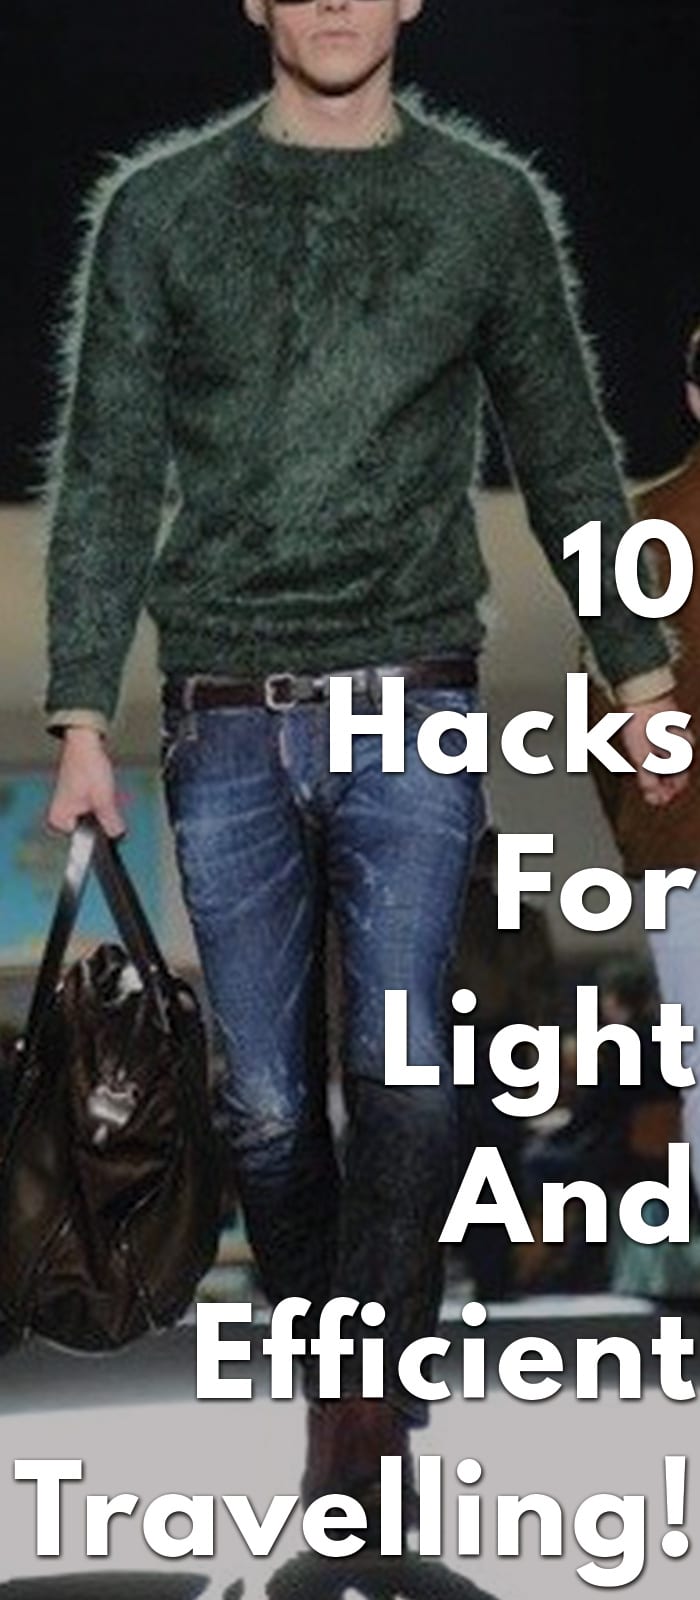 10-Hacks-For-Light-And-Efficient-Travelling!